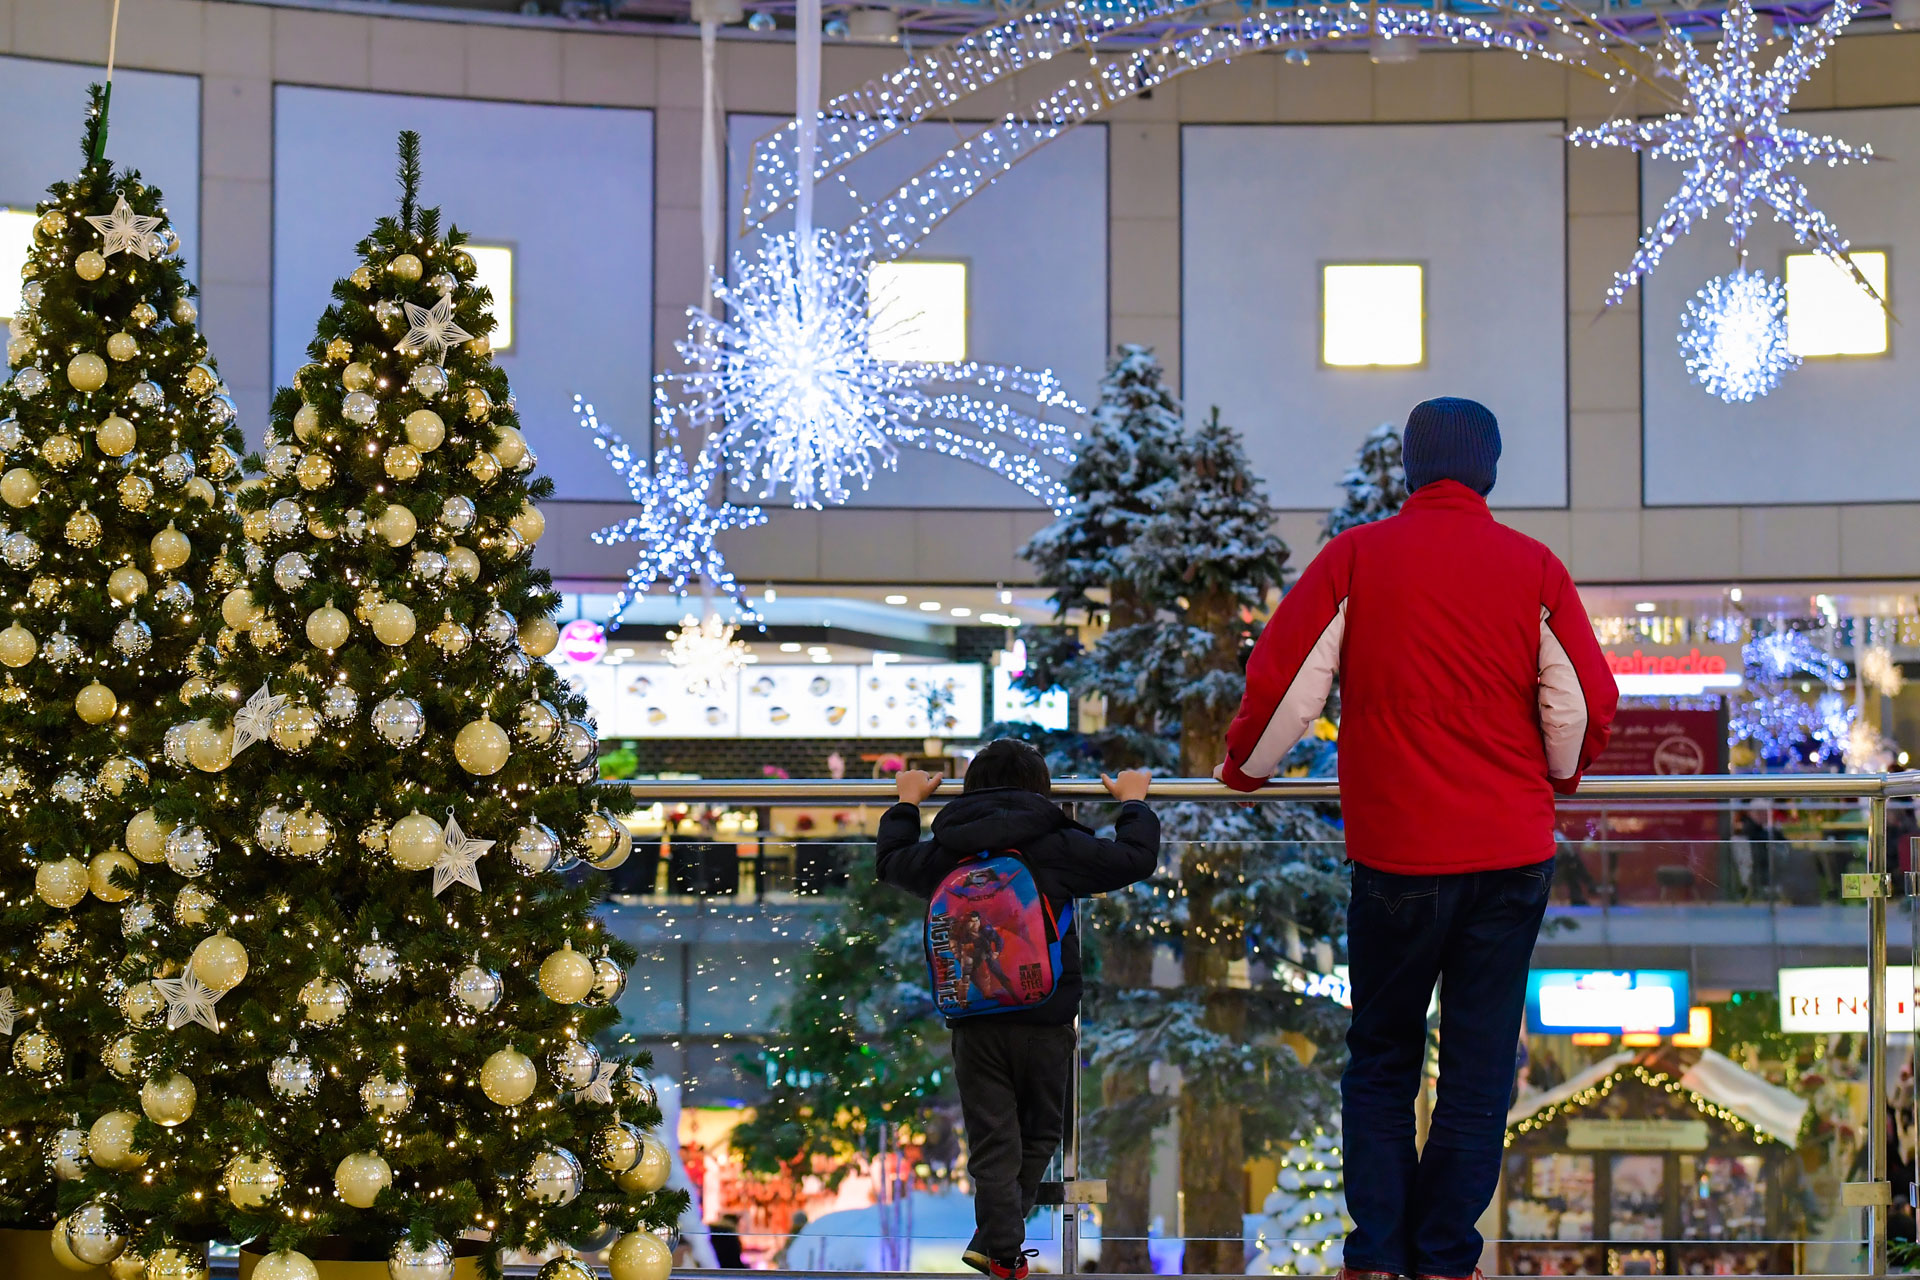 Malls in China lit up Christmas decorations - Global Times